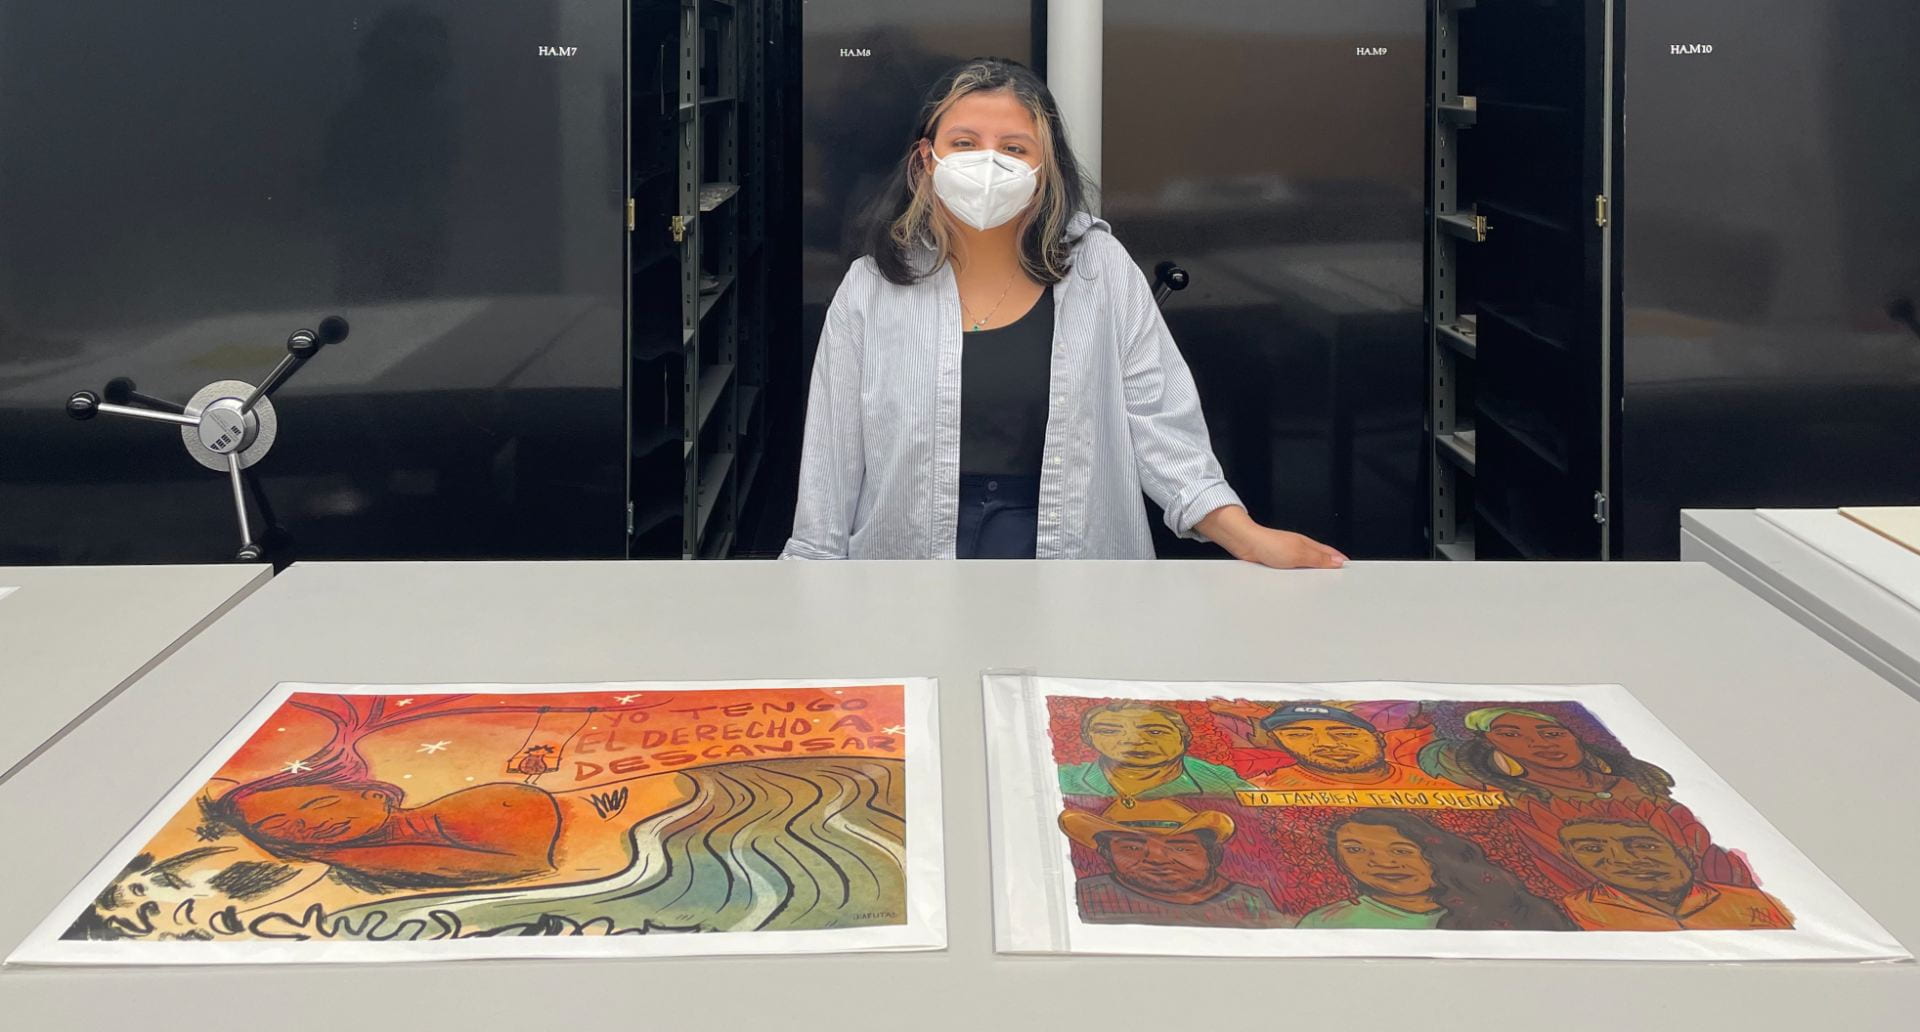 A person in their 20s standing behind a table with two prints made by a Mexican artist.